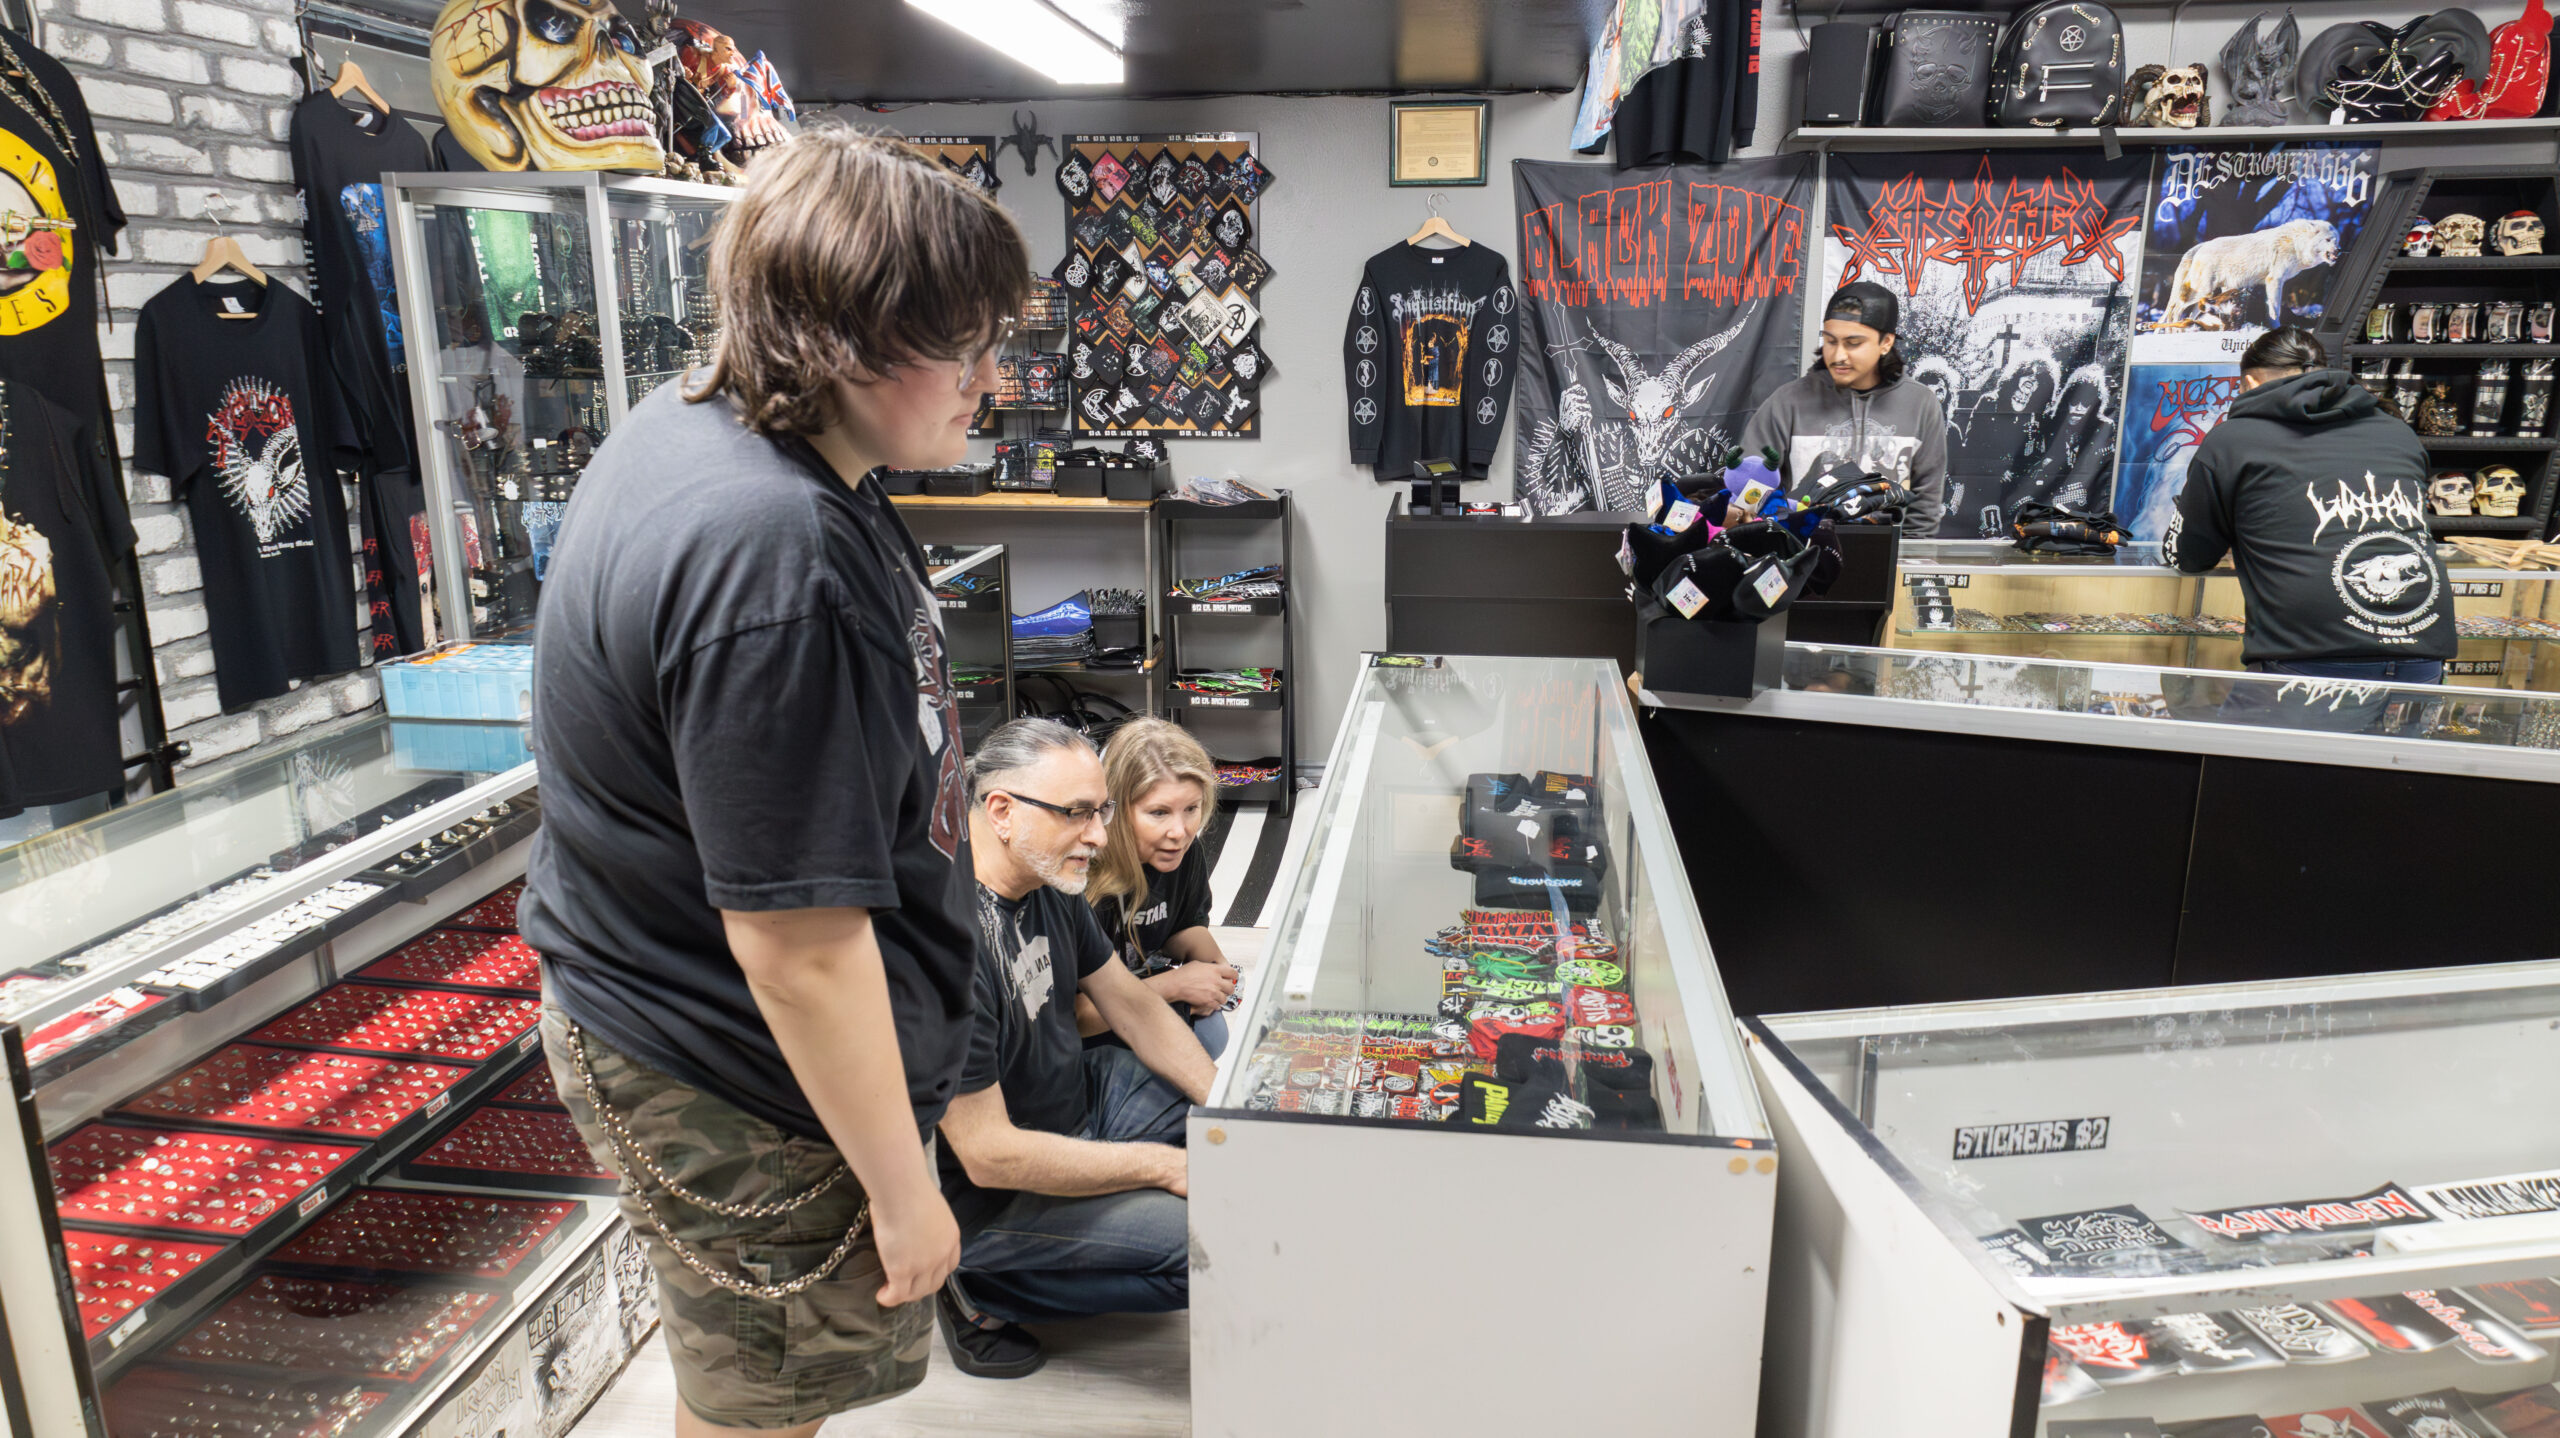 Customers looking at a display case of patches